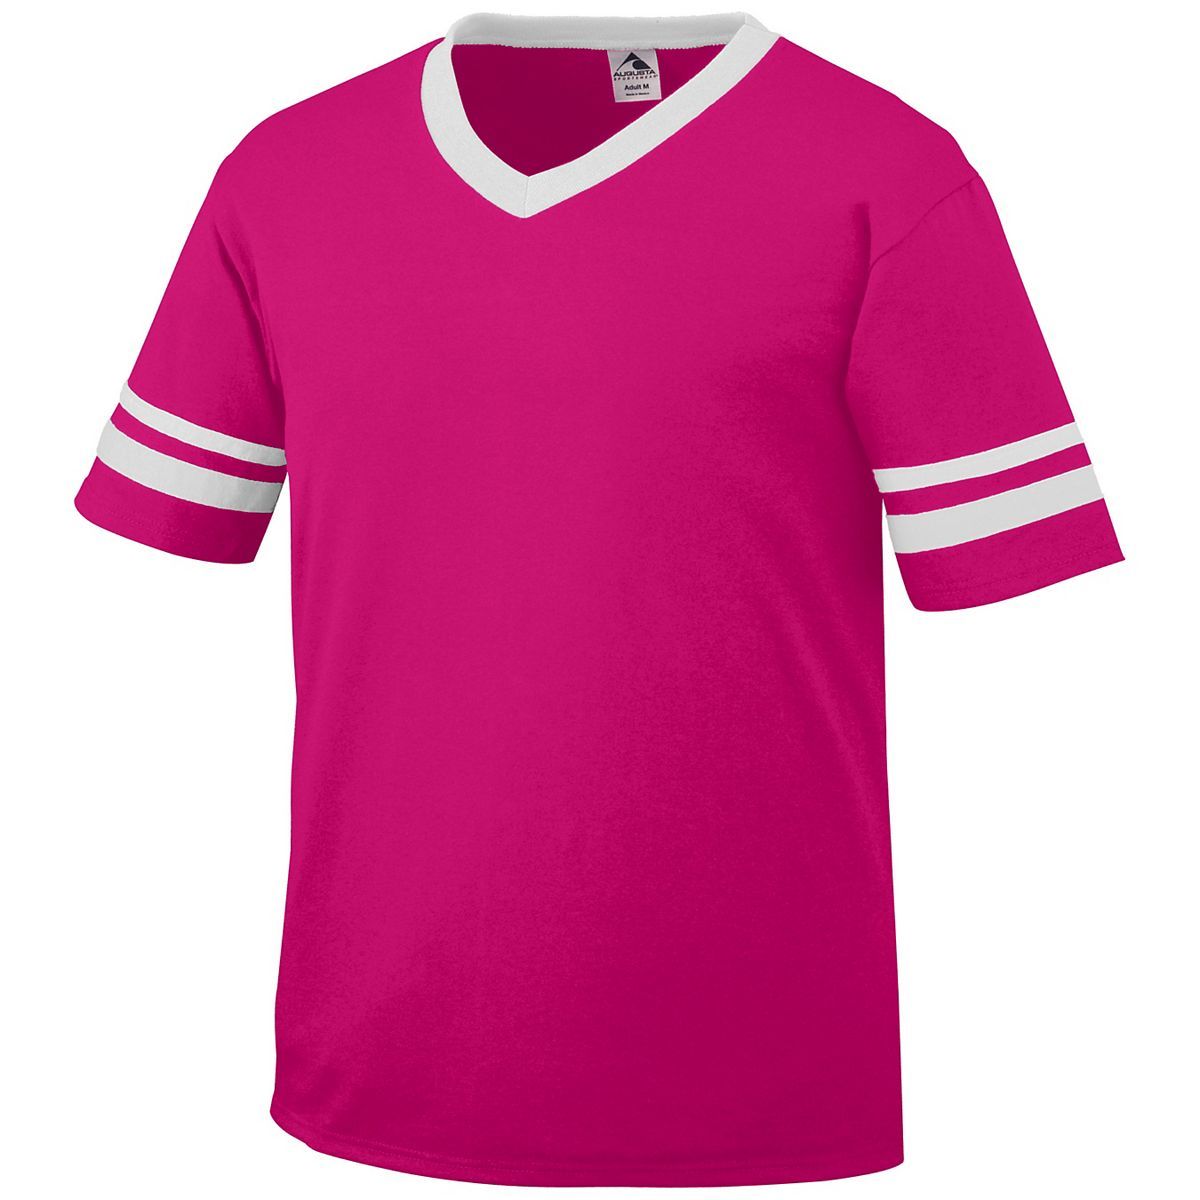 Augusta Sportswear Youth Sleeve Stripe Jersey in Power Pink/White  -Part of the Youth, Youth-Jersey, Augusta-Products, Shirts product lines at KanaleyCreations.com